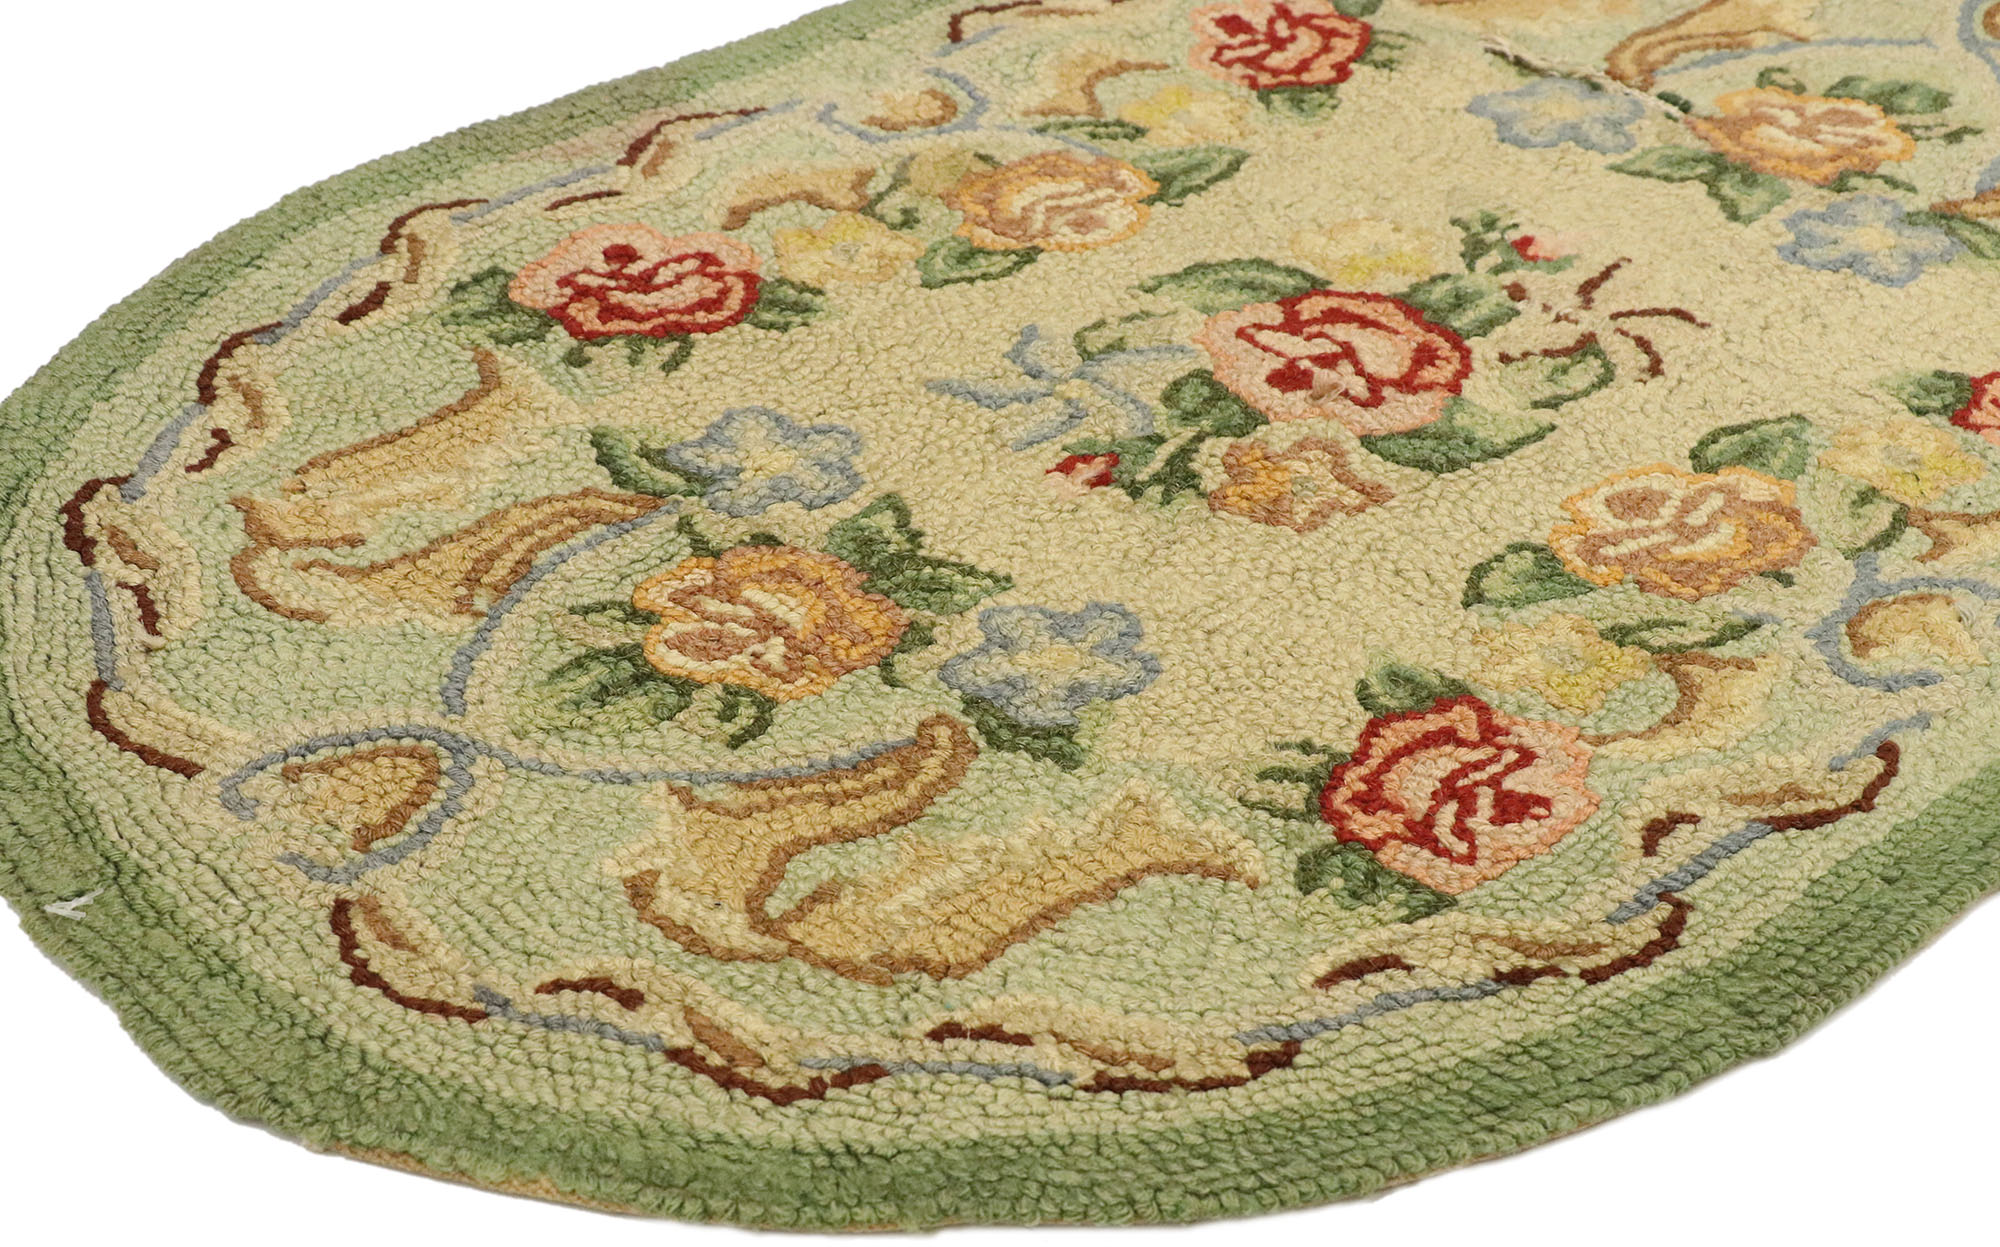 Vintage RUGBY Oval Floral Hooked Rug 2' X 3' Japan 2 Available 